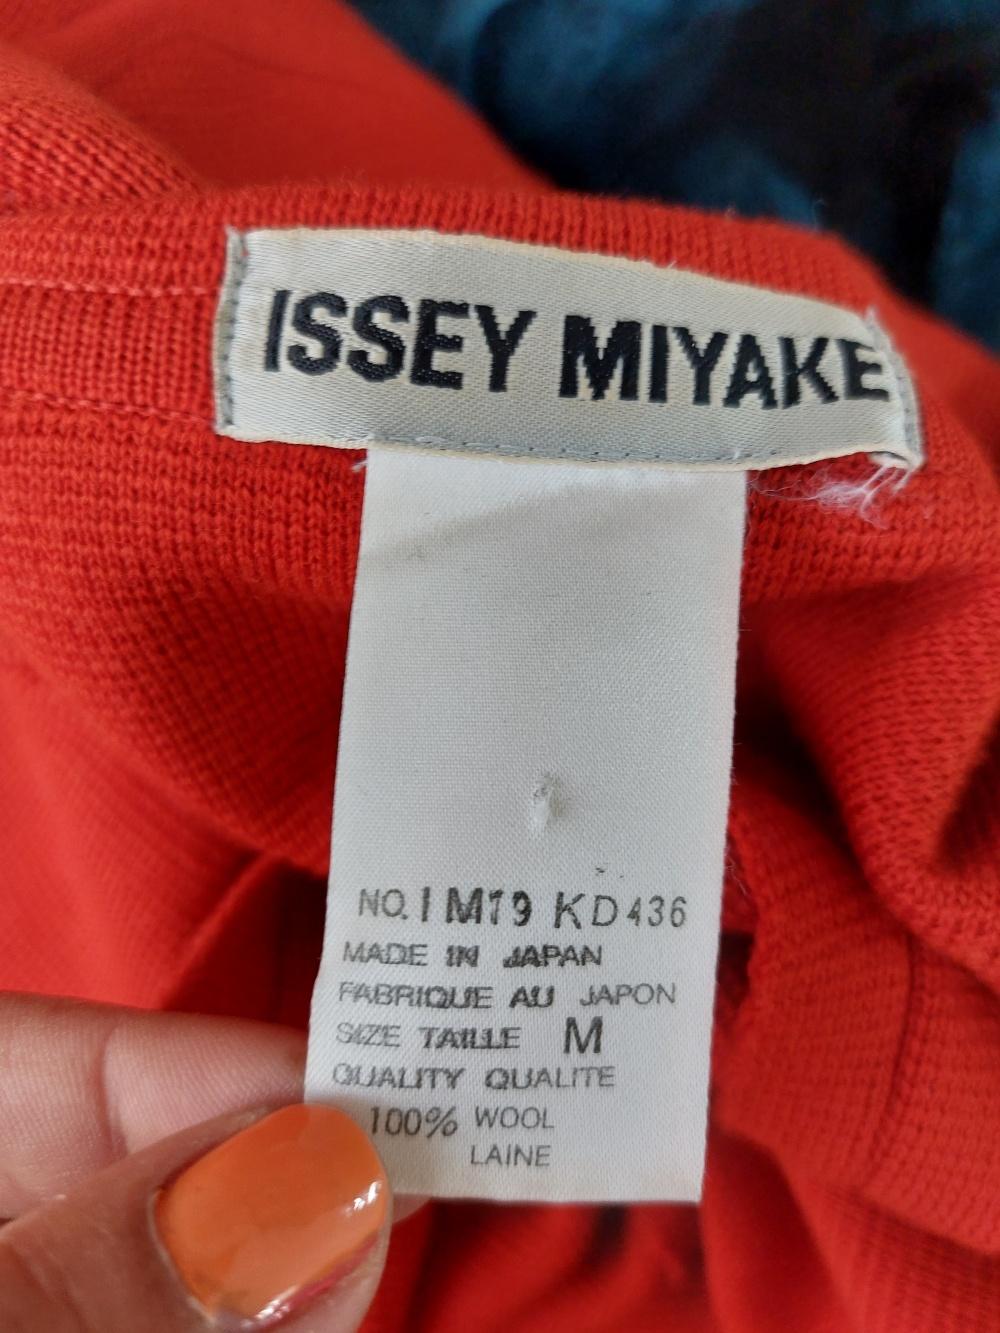 Issey Miyake Pleats Please Red Piercing Punk Deconstructed Rivet Coat Jacket For Sale 9